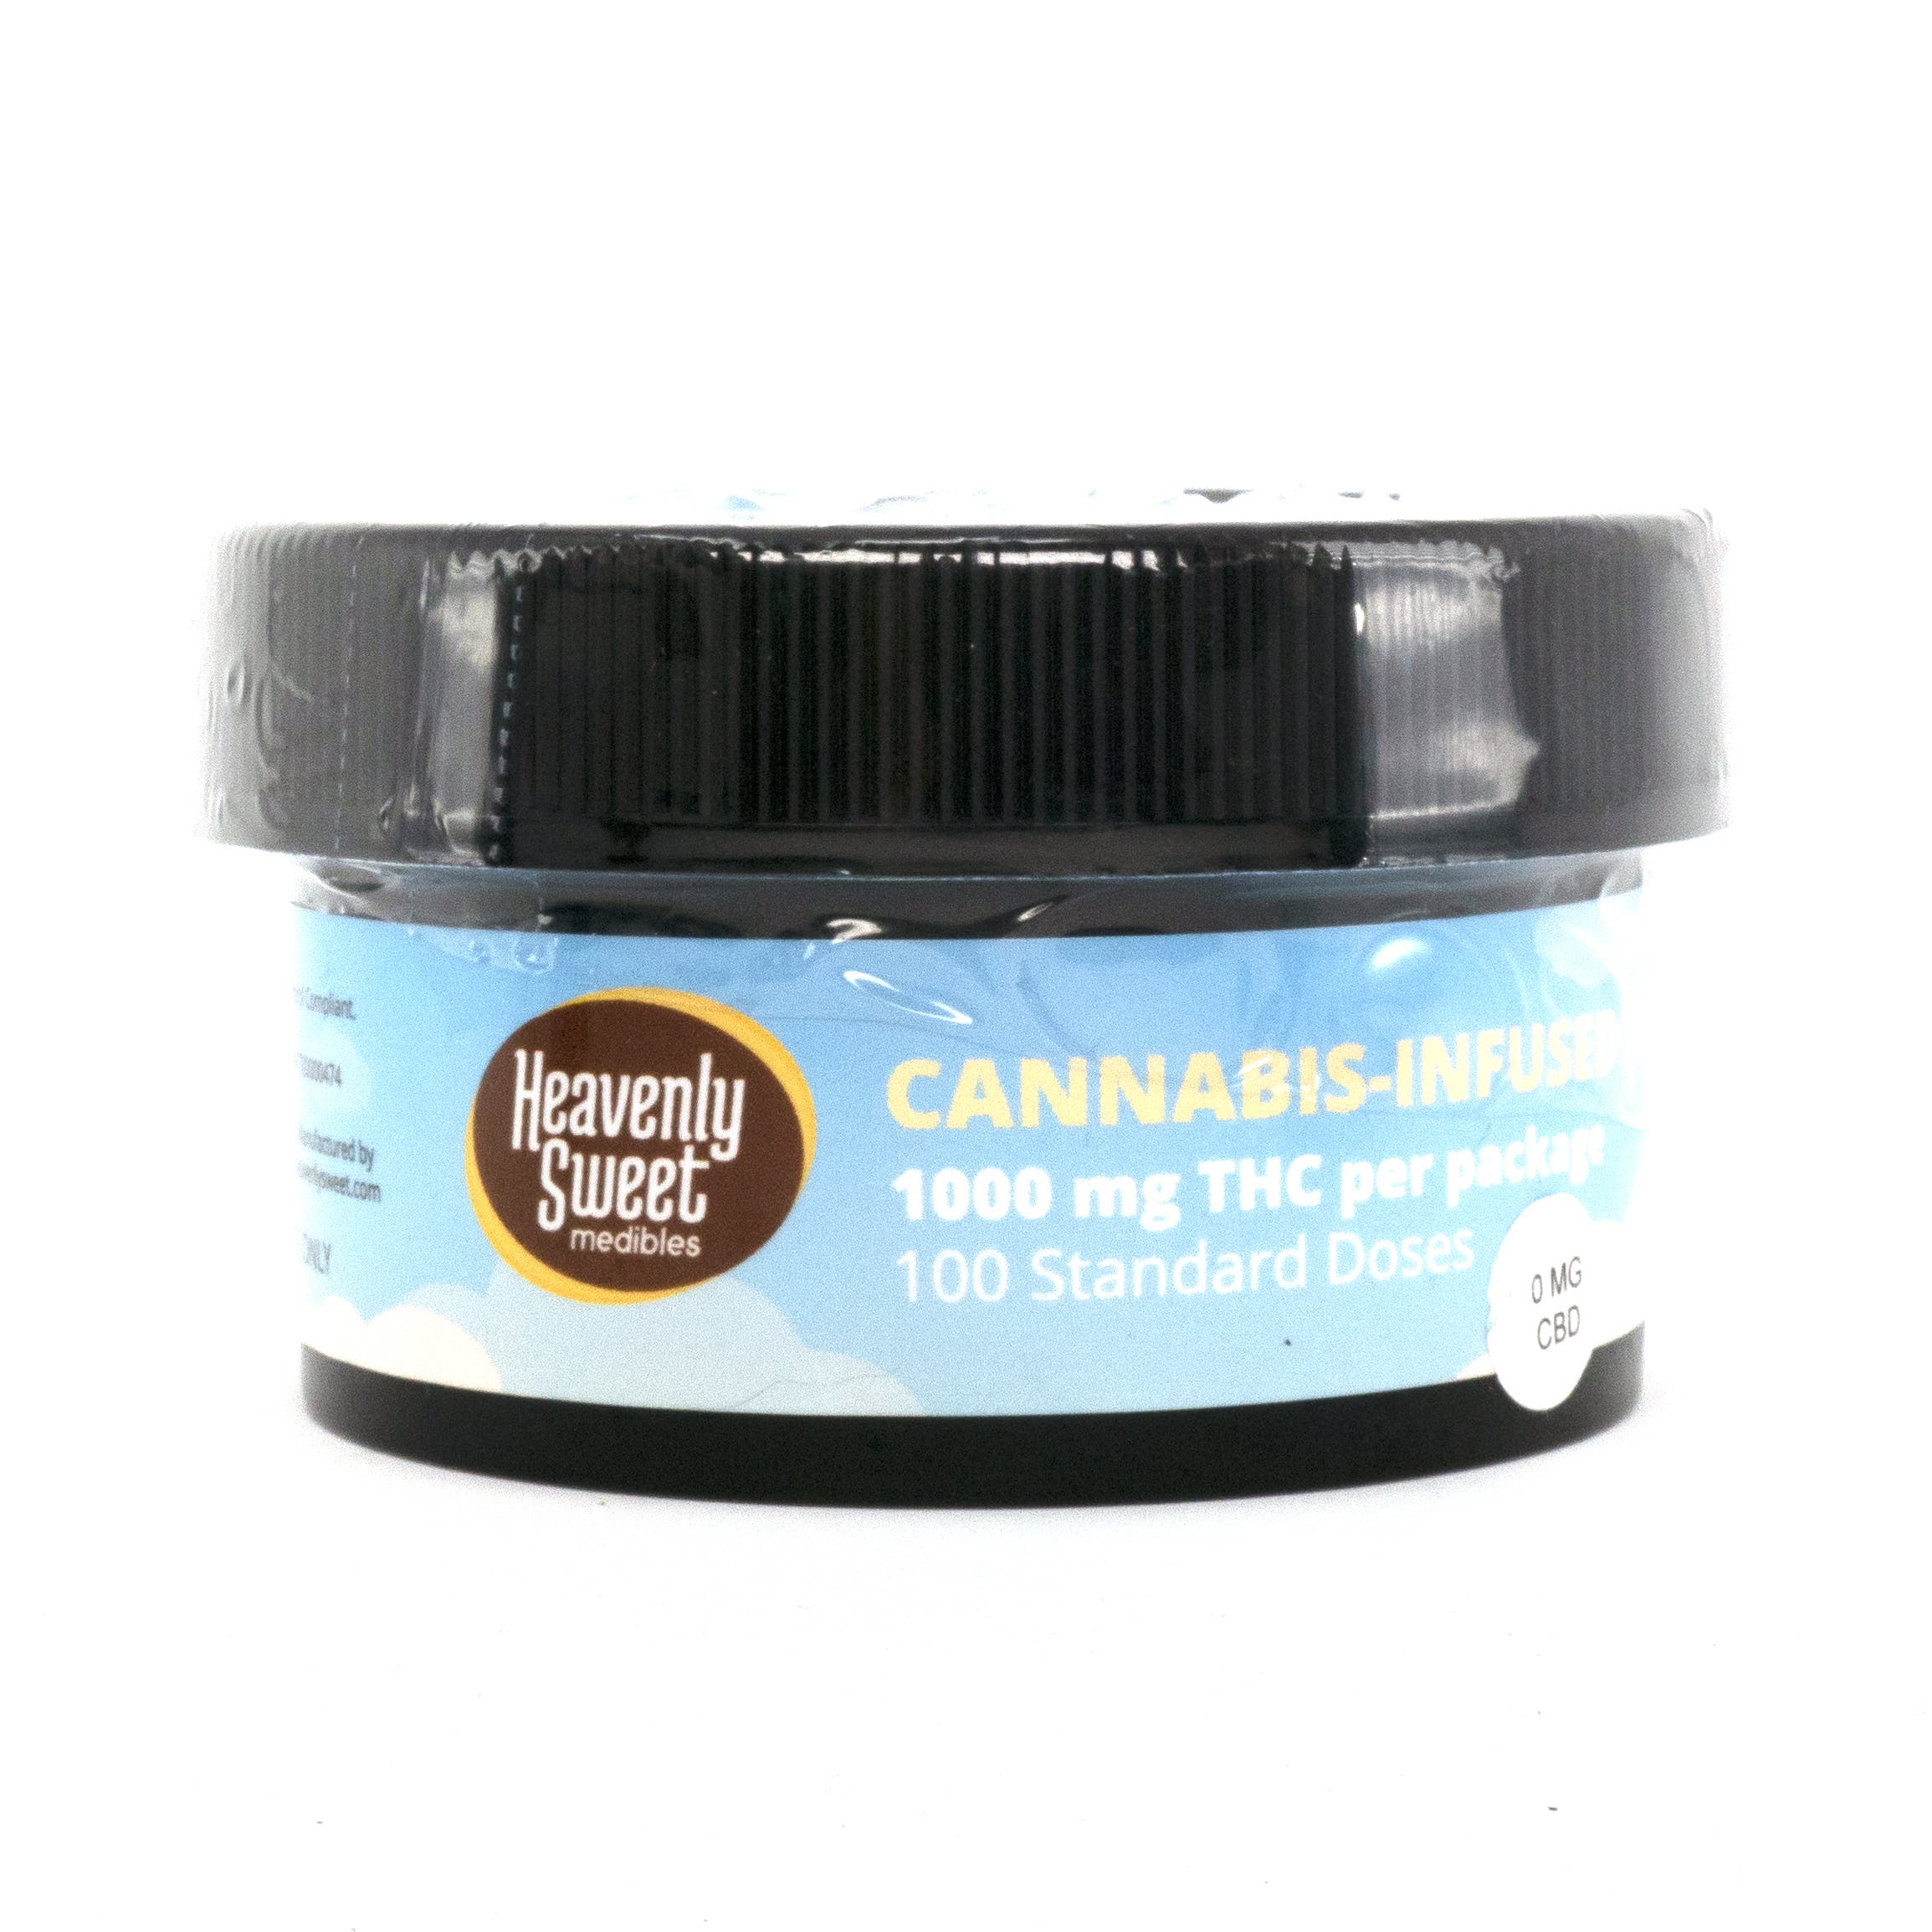 edible-heavenly-sweet-heavenly-sweet-cannabutter-1000mg-4oz-container